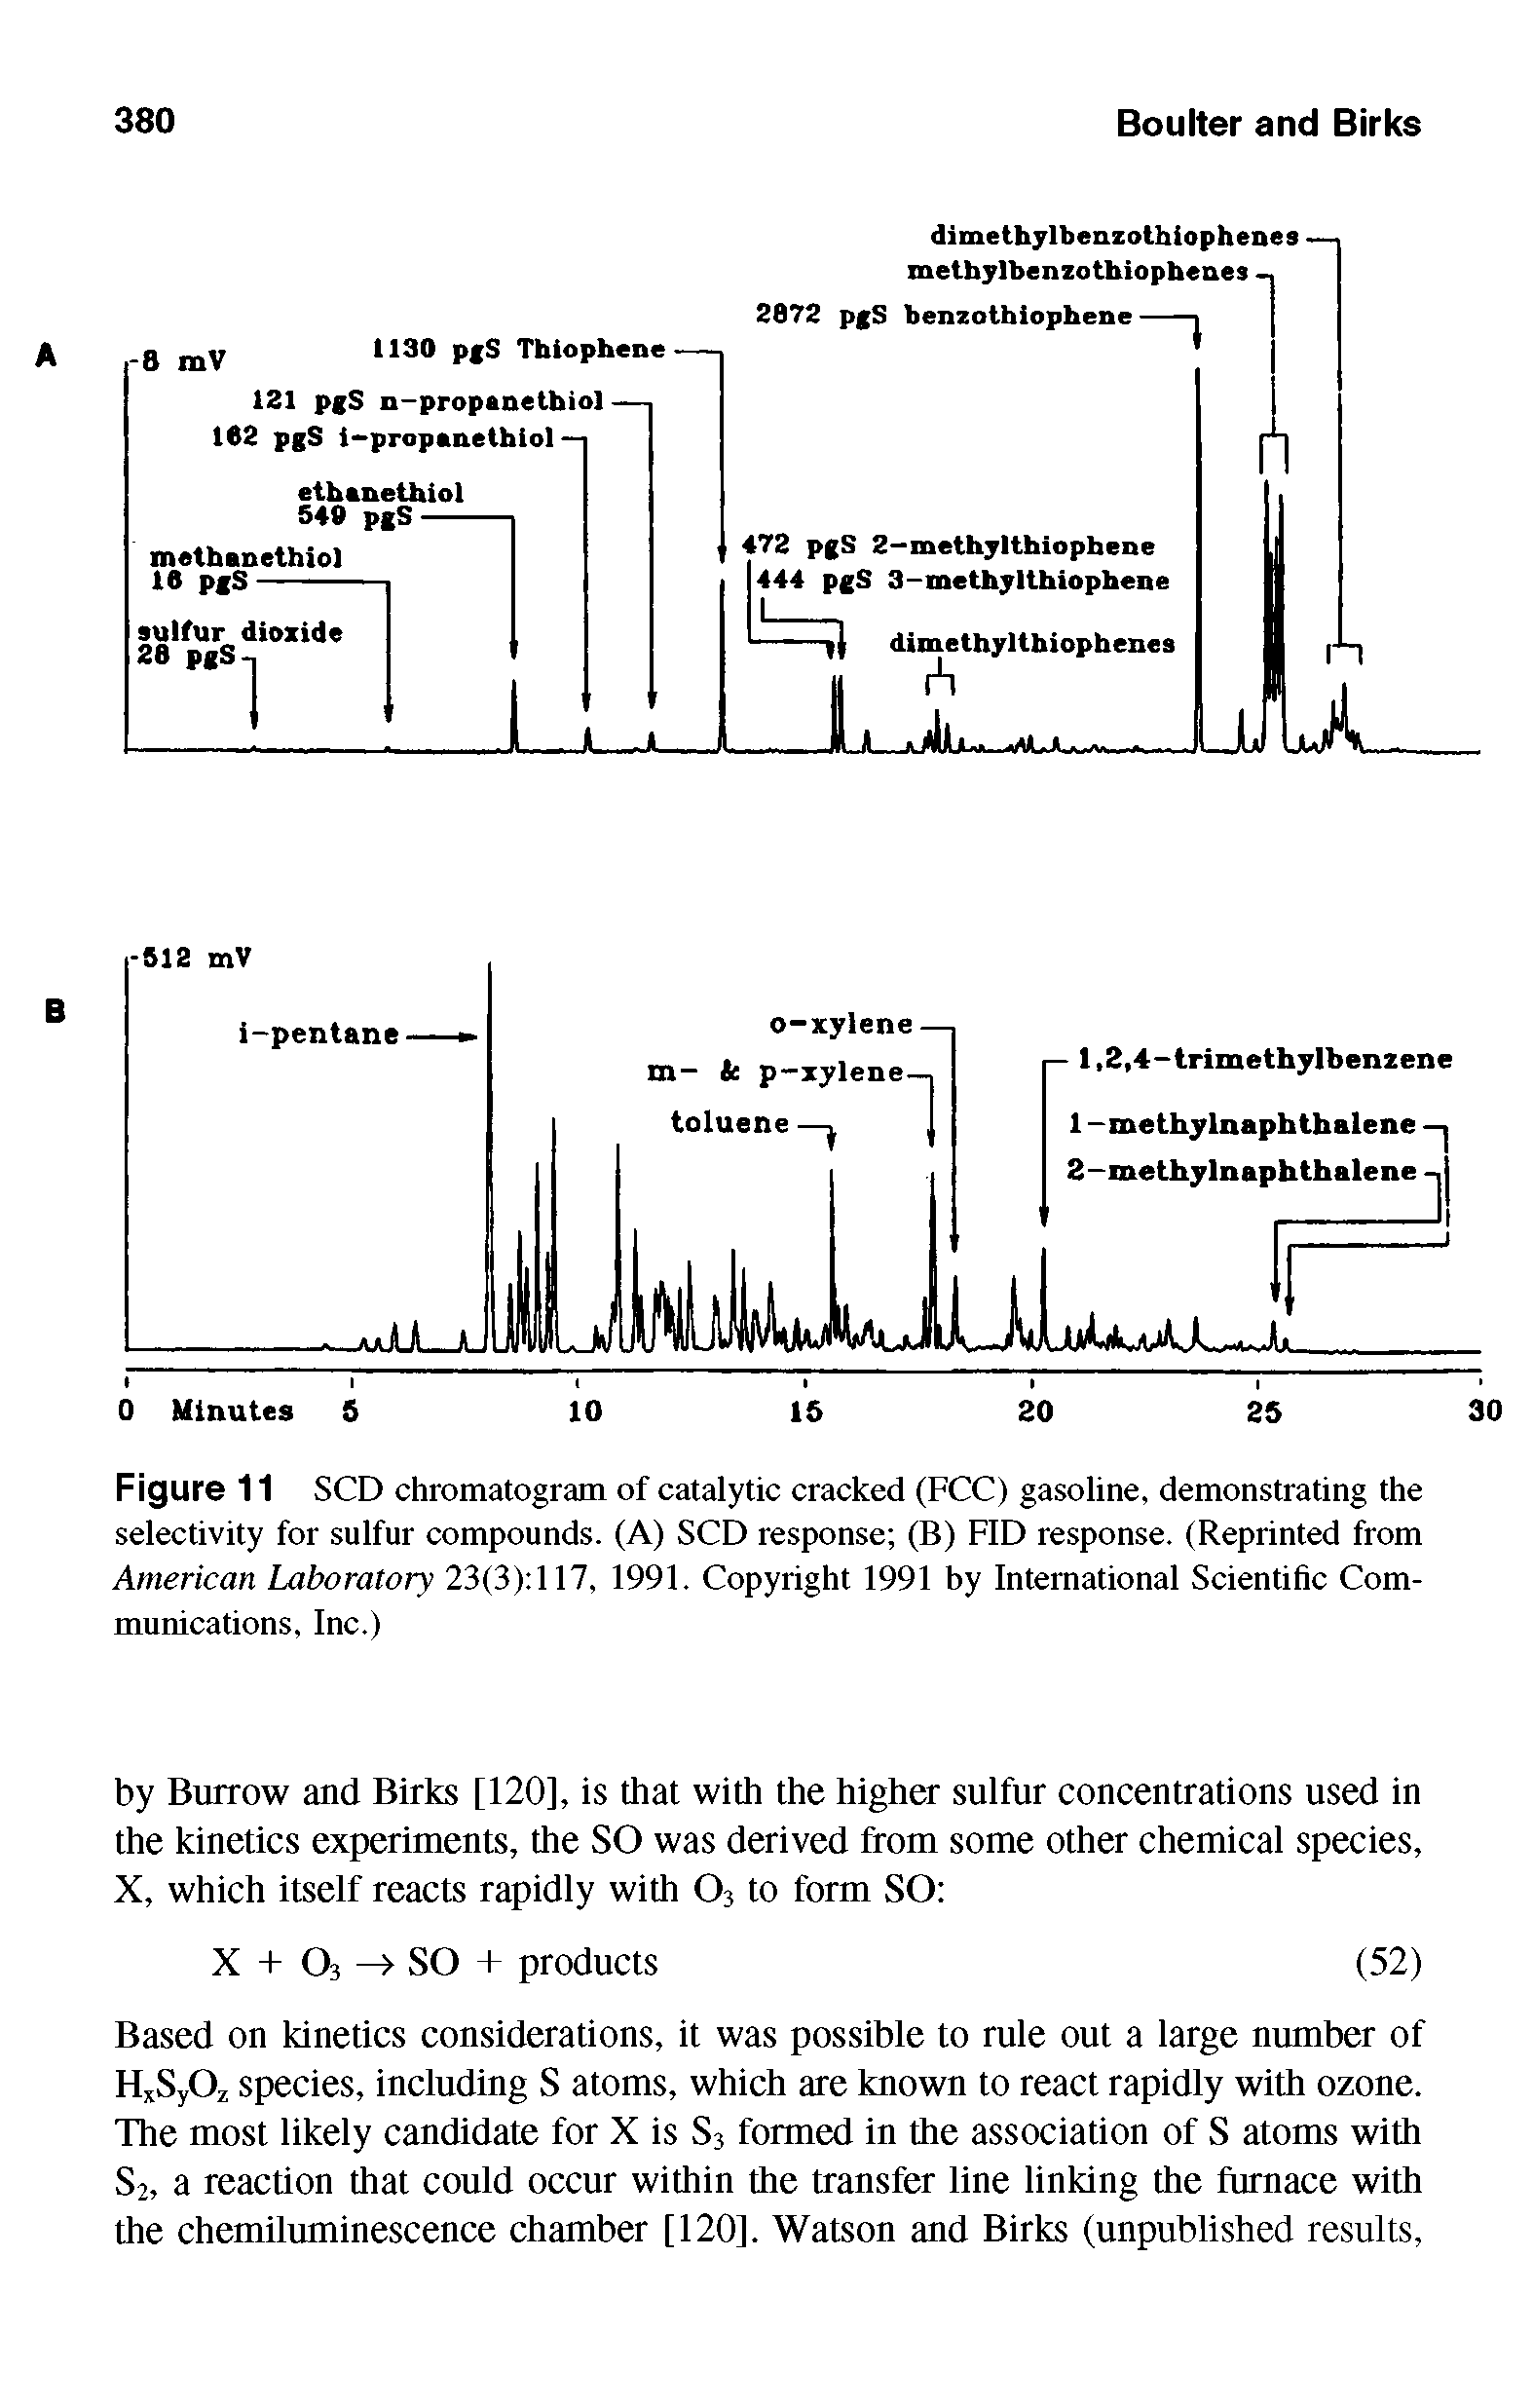 Figure 11 SCD chromatogram of catalytic cracked (FCC) gasoline, demonstrating the selectivity for sulfur compounds. (A) SCD response (B) FID response. (Reprinted from American Laboratory 23(3) 117, 1991. Copyright 1991 by International Scientific Communications, Inc.)...